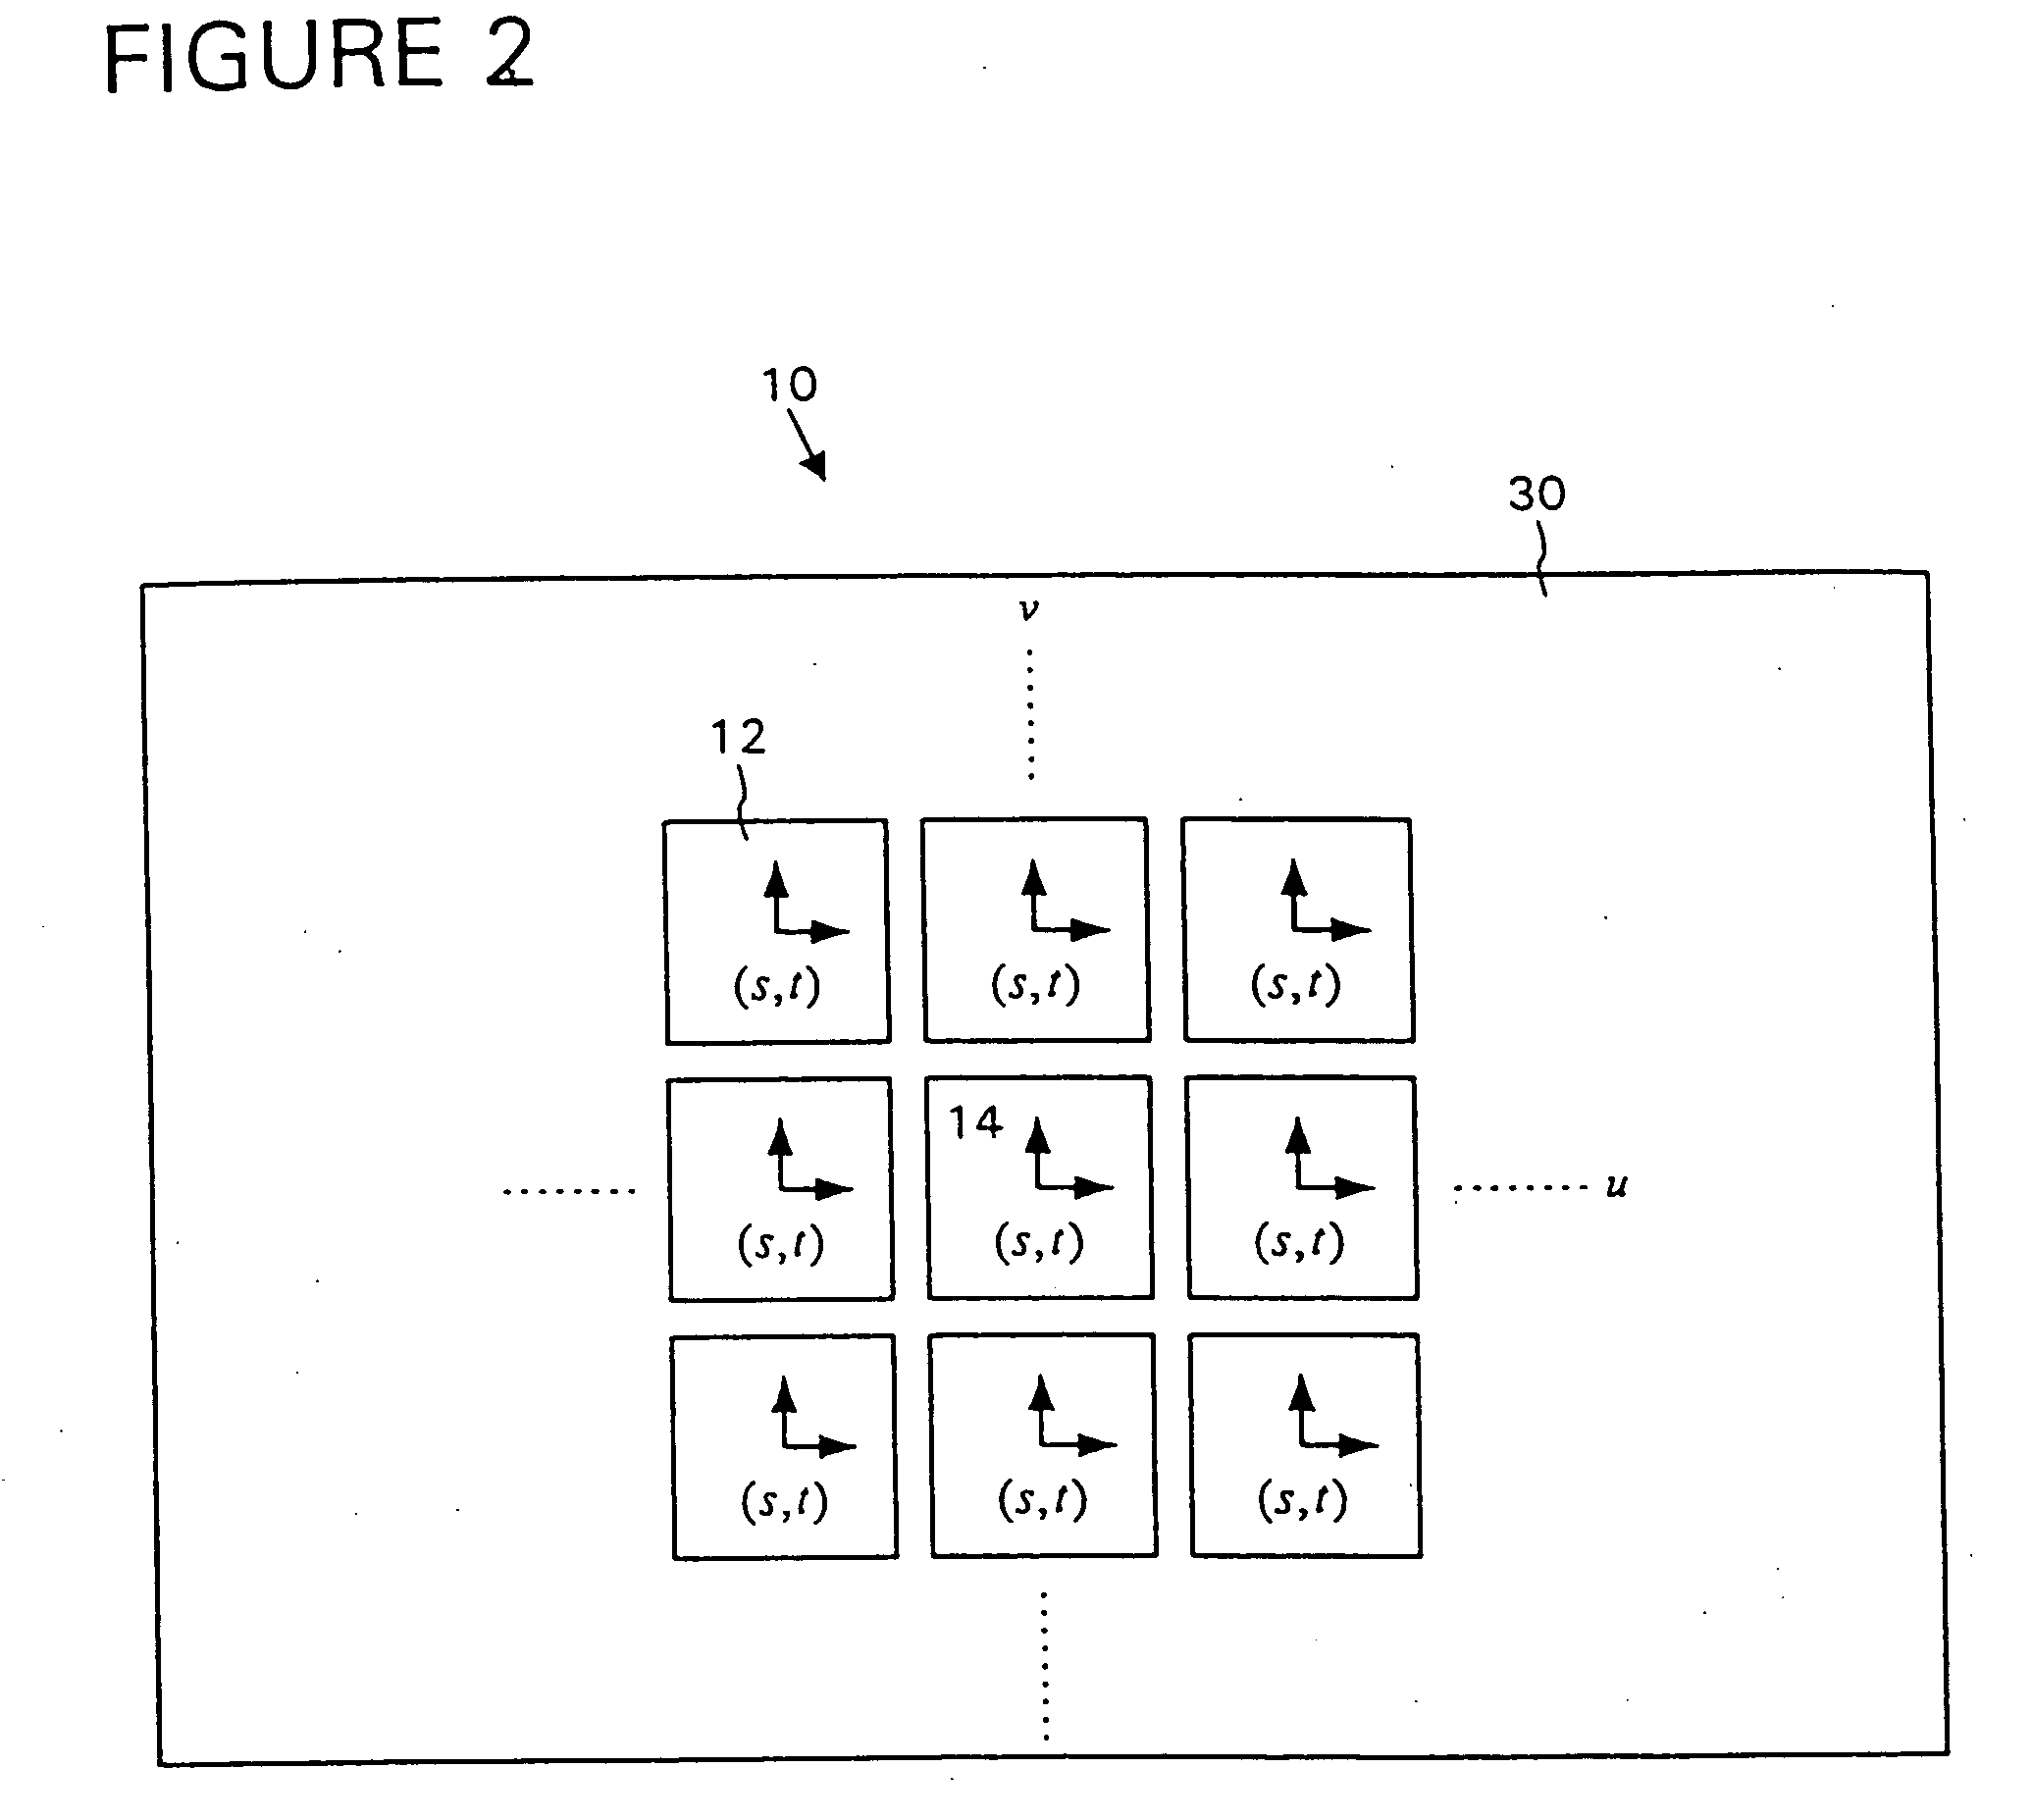 Data structure for efficient access to variable-size data objects